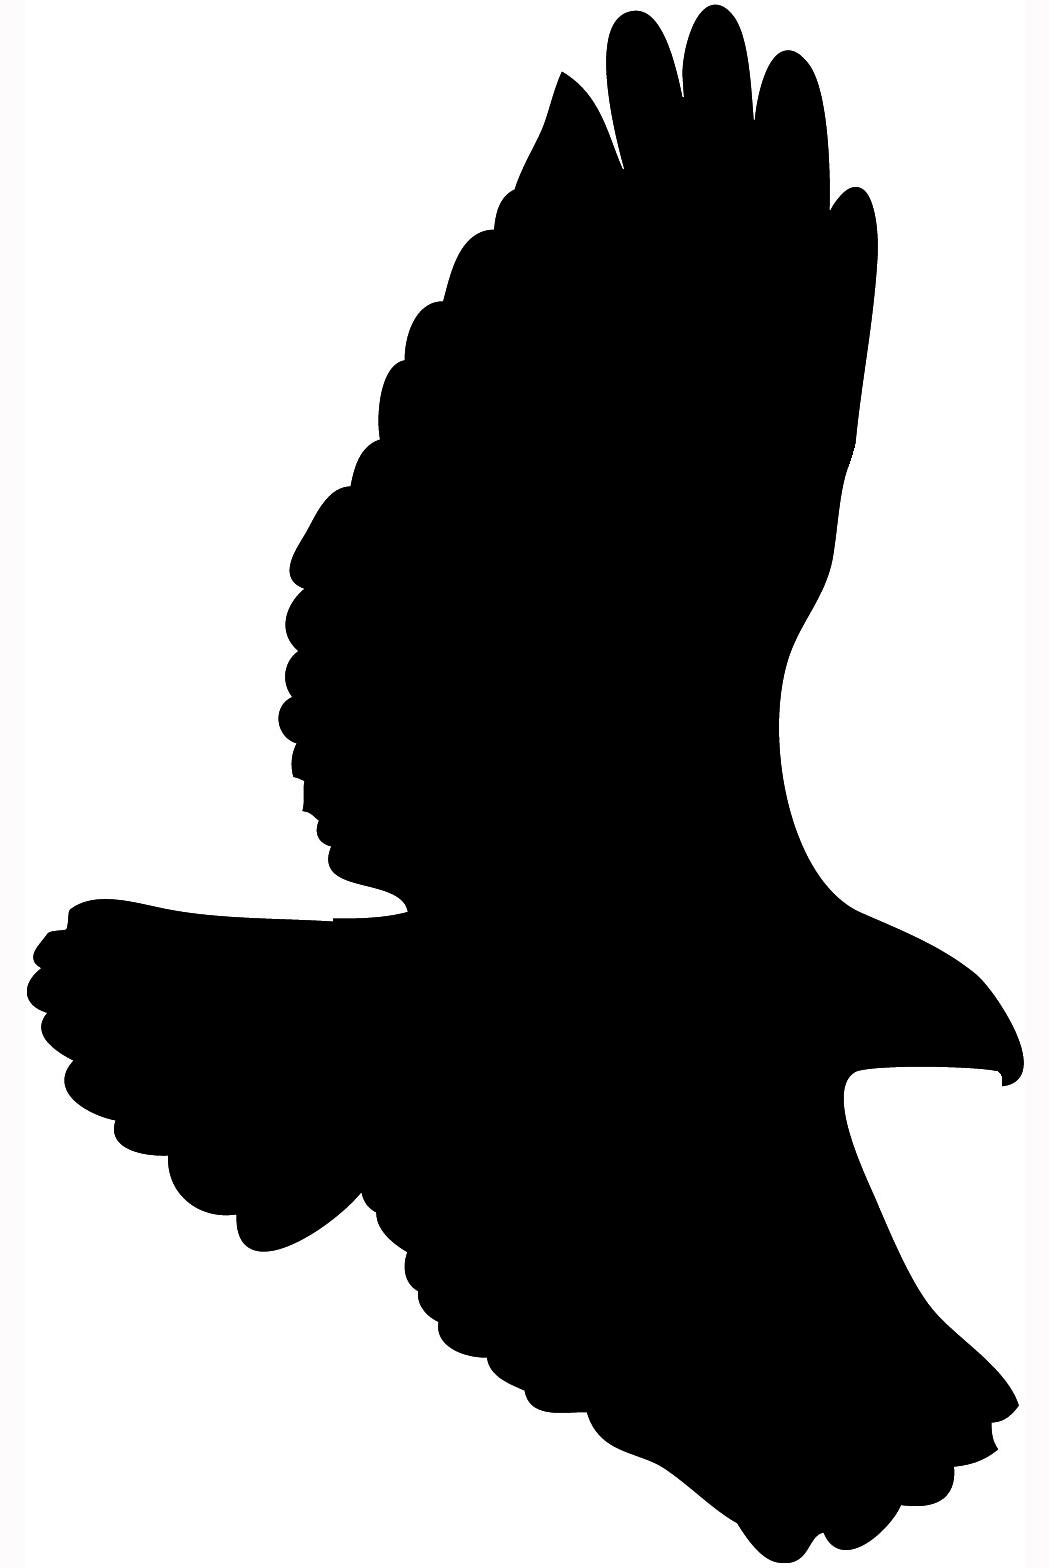 red tailed hawk silhouette